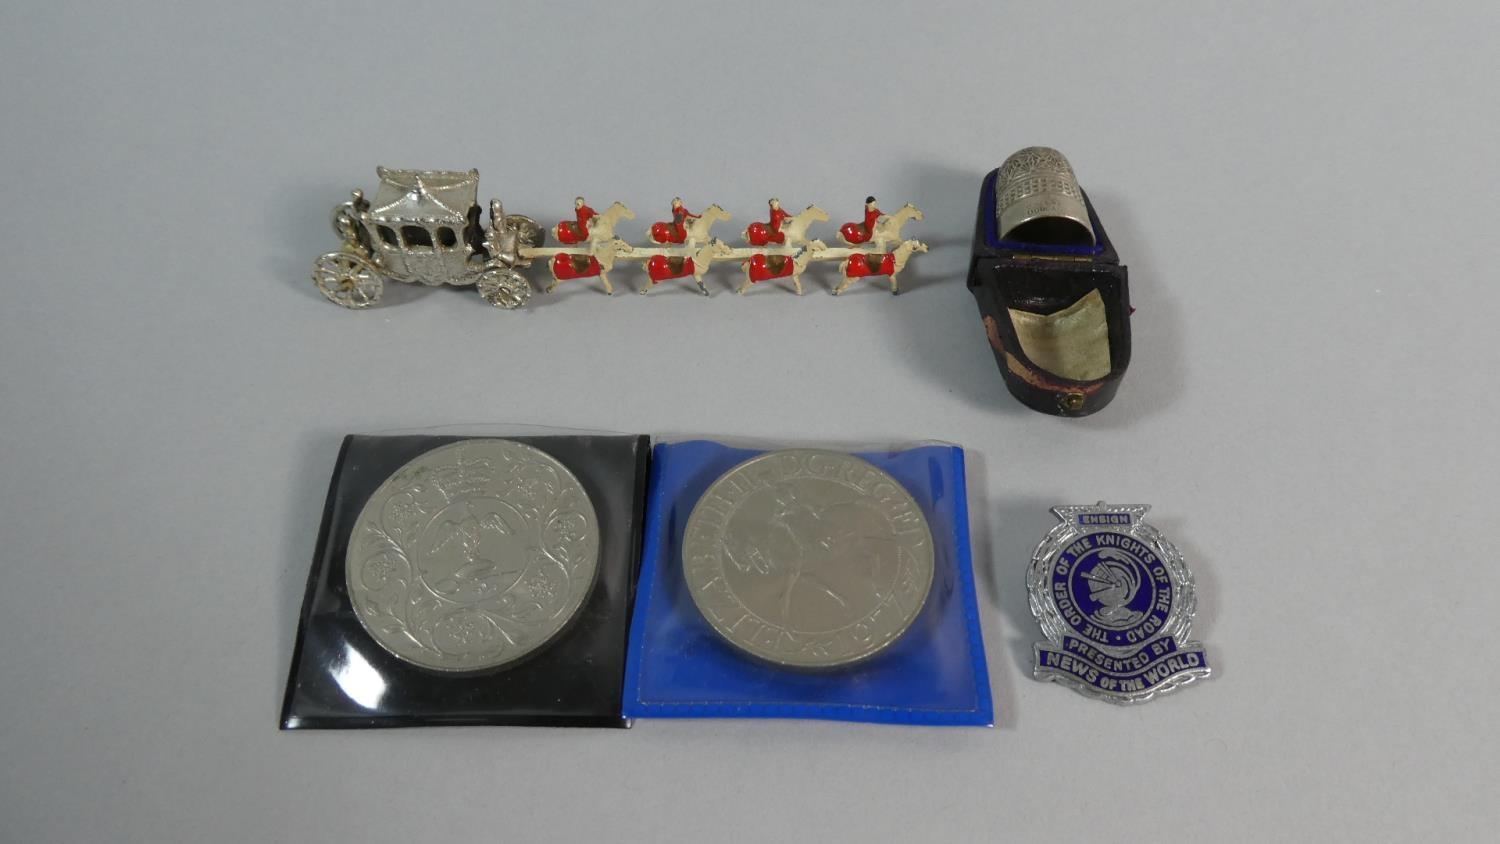 A Motoring Badge 'The Order Of The Knights Of The Road', a Cased Charles Horner 'Dorcas' Thimble,